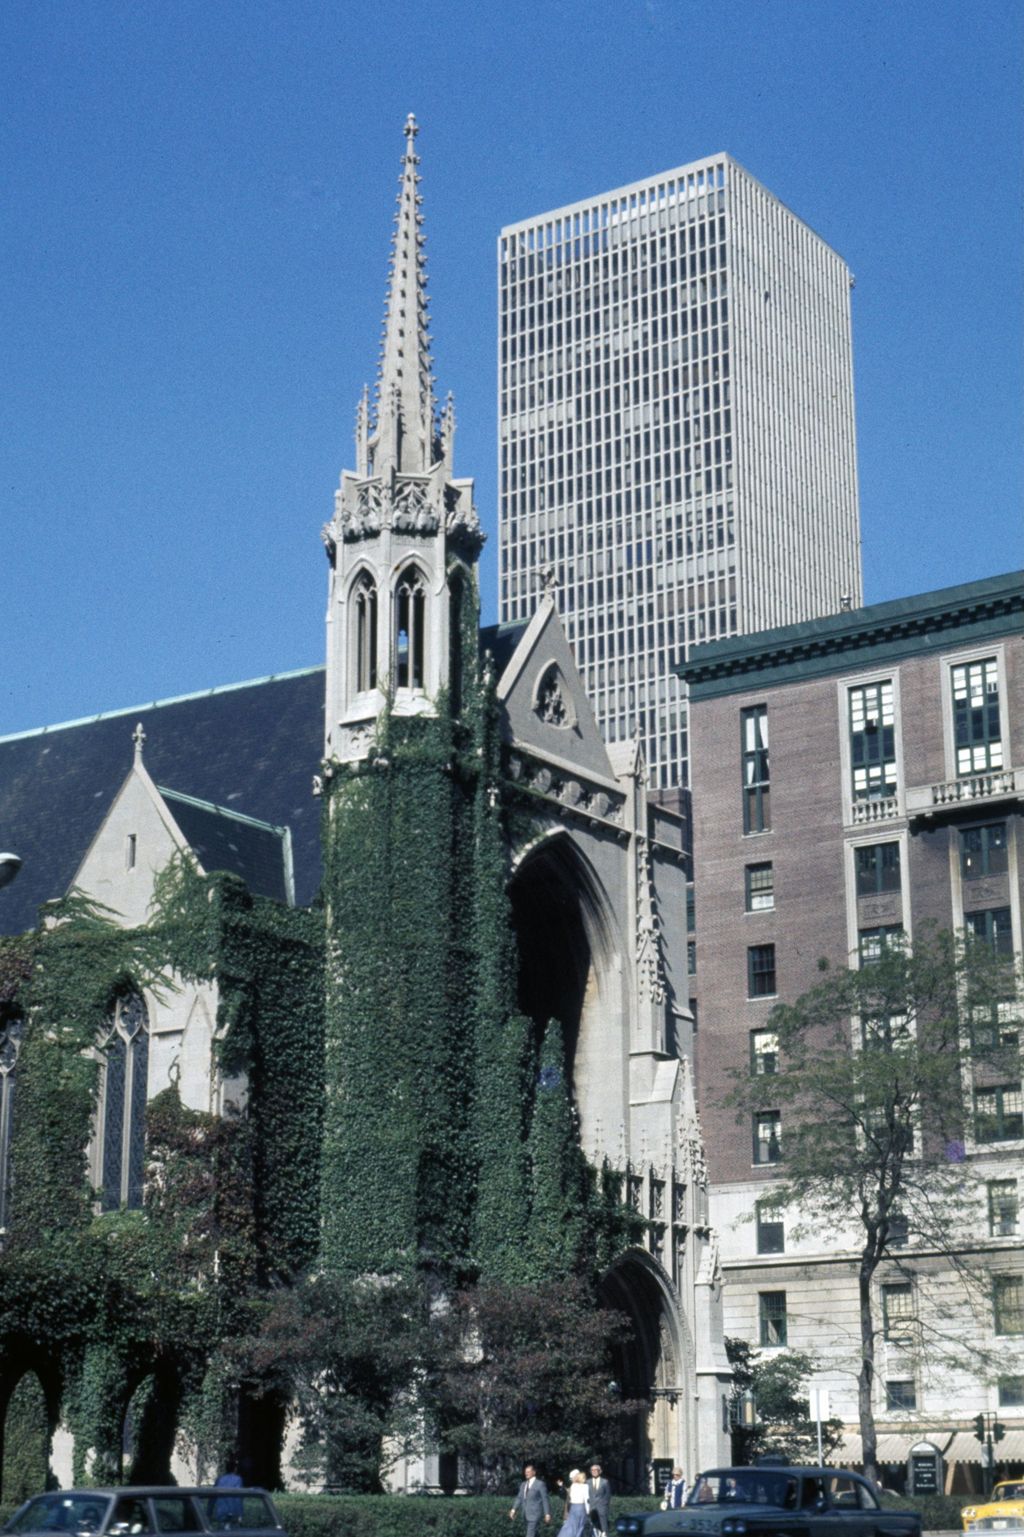 Miniature of Fourth Presbyterian Church and nearby buildings